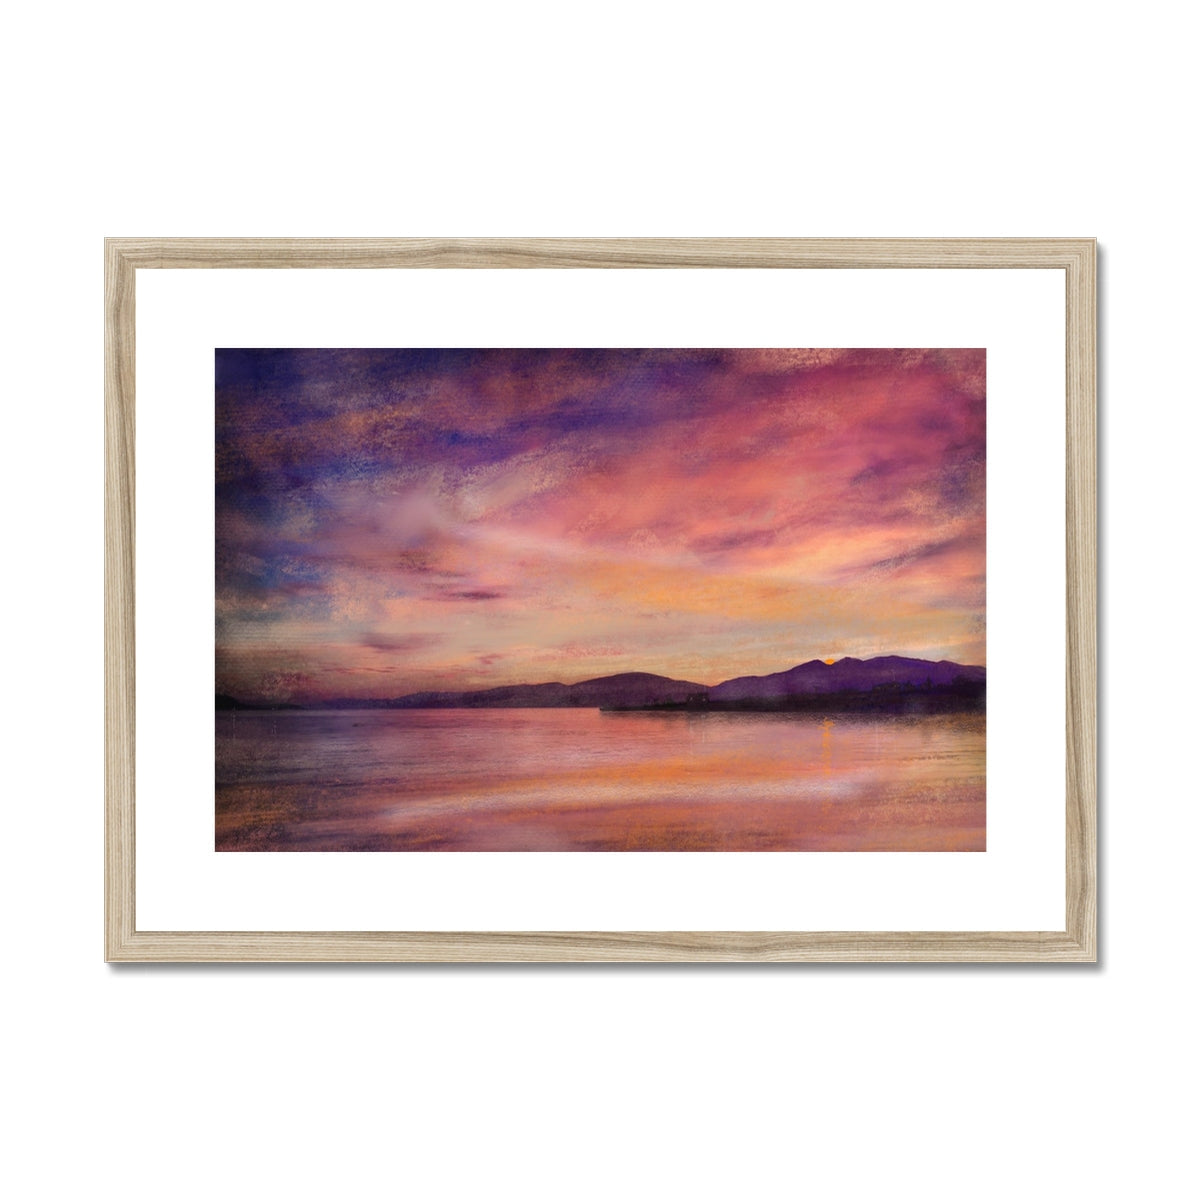 Loch Linnhe Dusk Painting | Framed & Mounted Prints From Scotland-Framed & Mounted Prints-Scottish Lochs & Mountains Art Gallery-A2 Landscape-Natural Frame-Paintings, Prints, Homeware, Art Gifts From Scotland By Scottish Artist Kevin Hunter